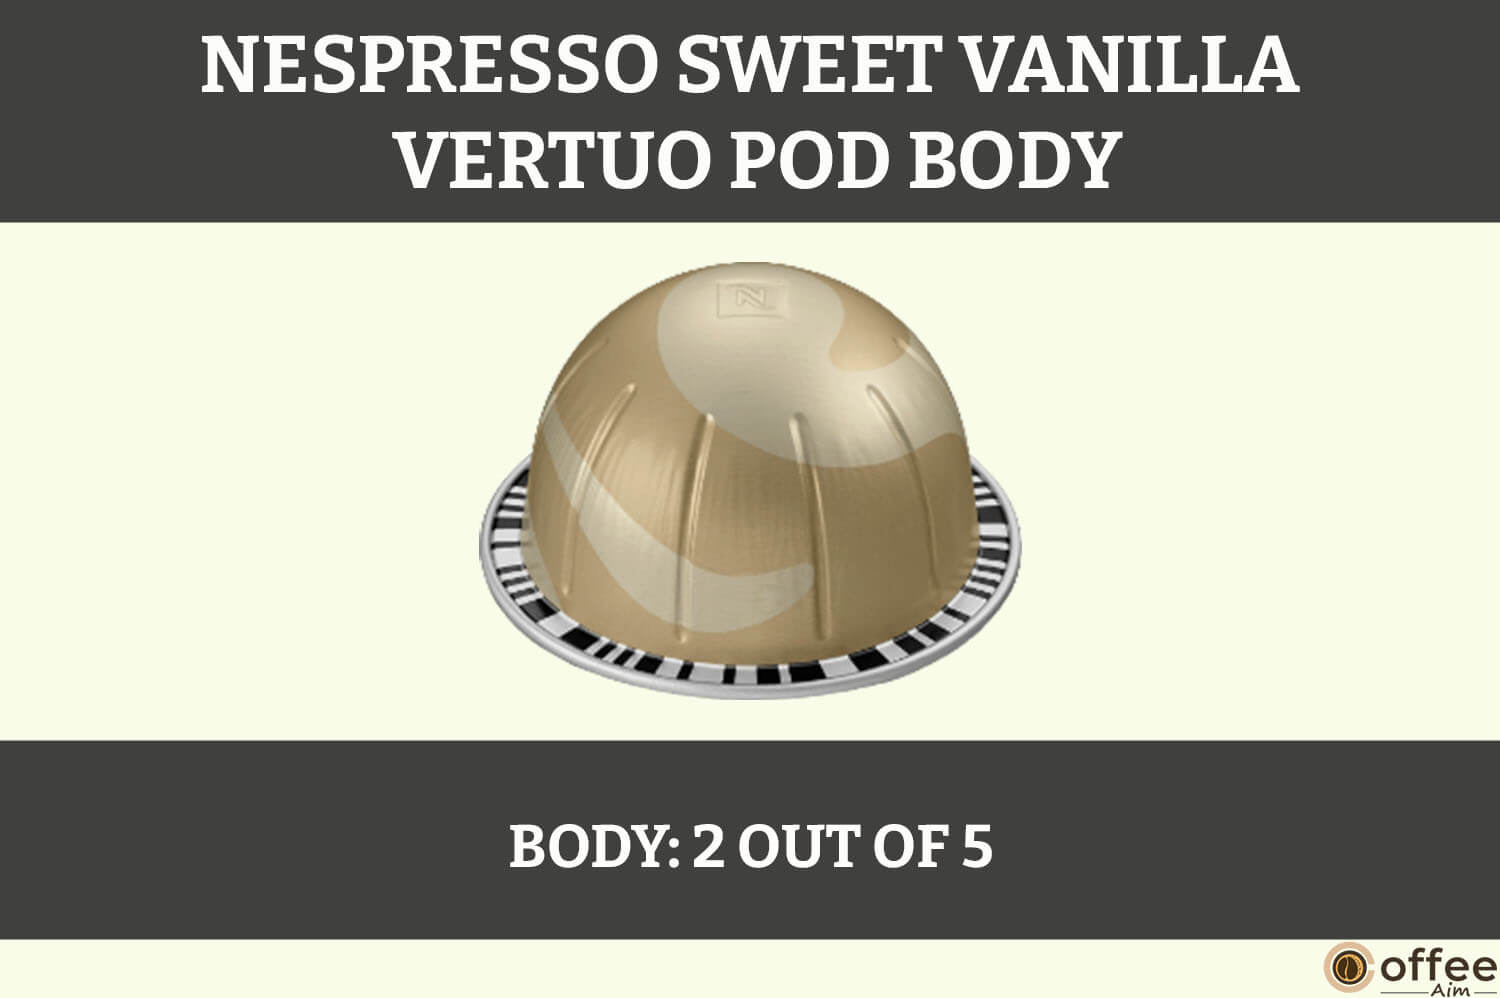 This image captures the essence of the Nespresso Sweet Vanilla Vertuo Pod, providing a visual insight for the article titled 'Nespresso Sweet Vanilla Vertuo Pod Review'